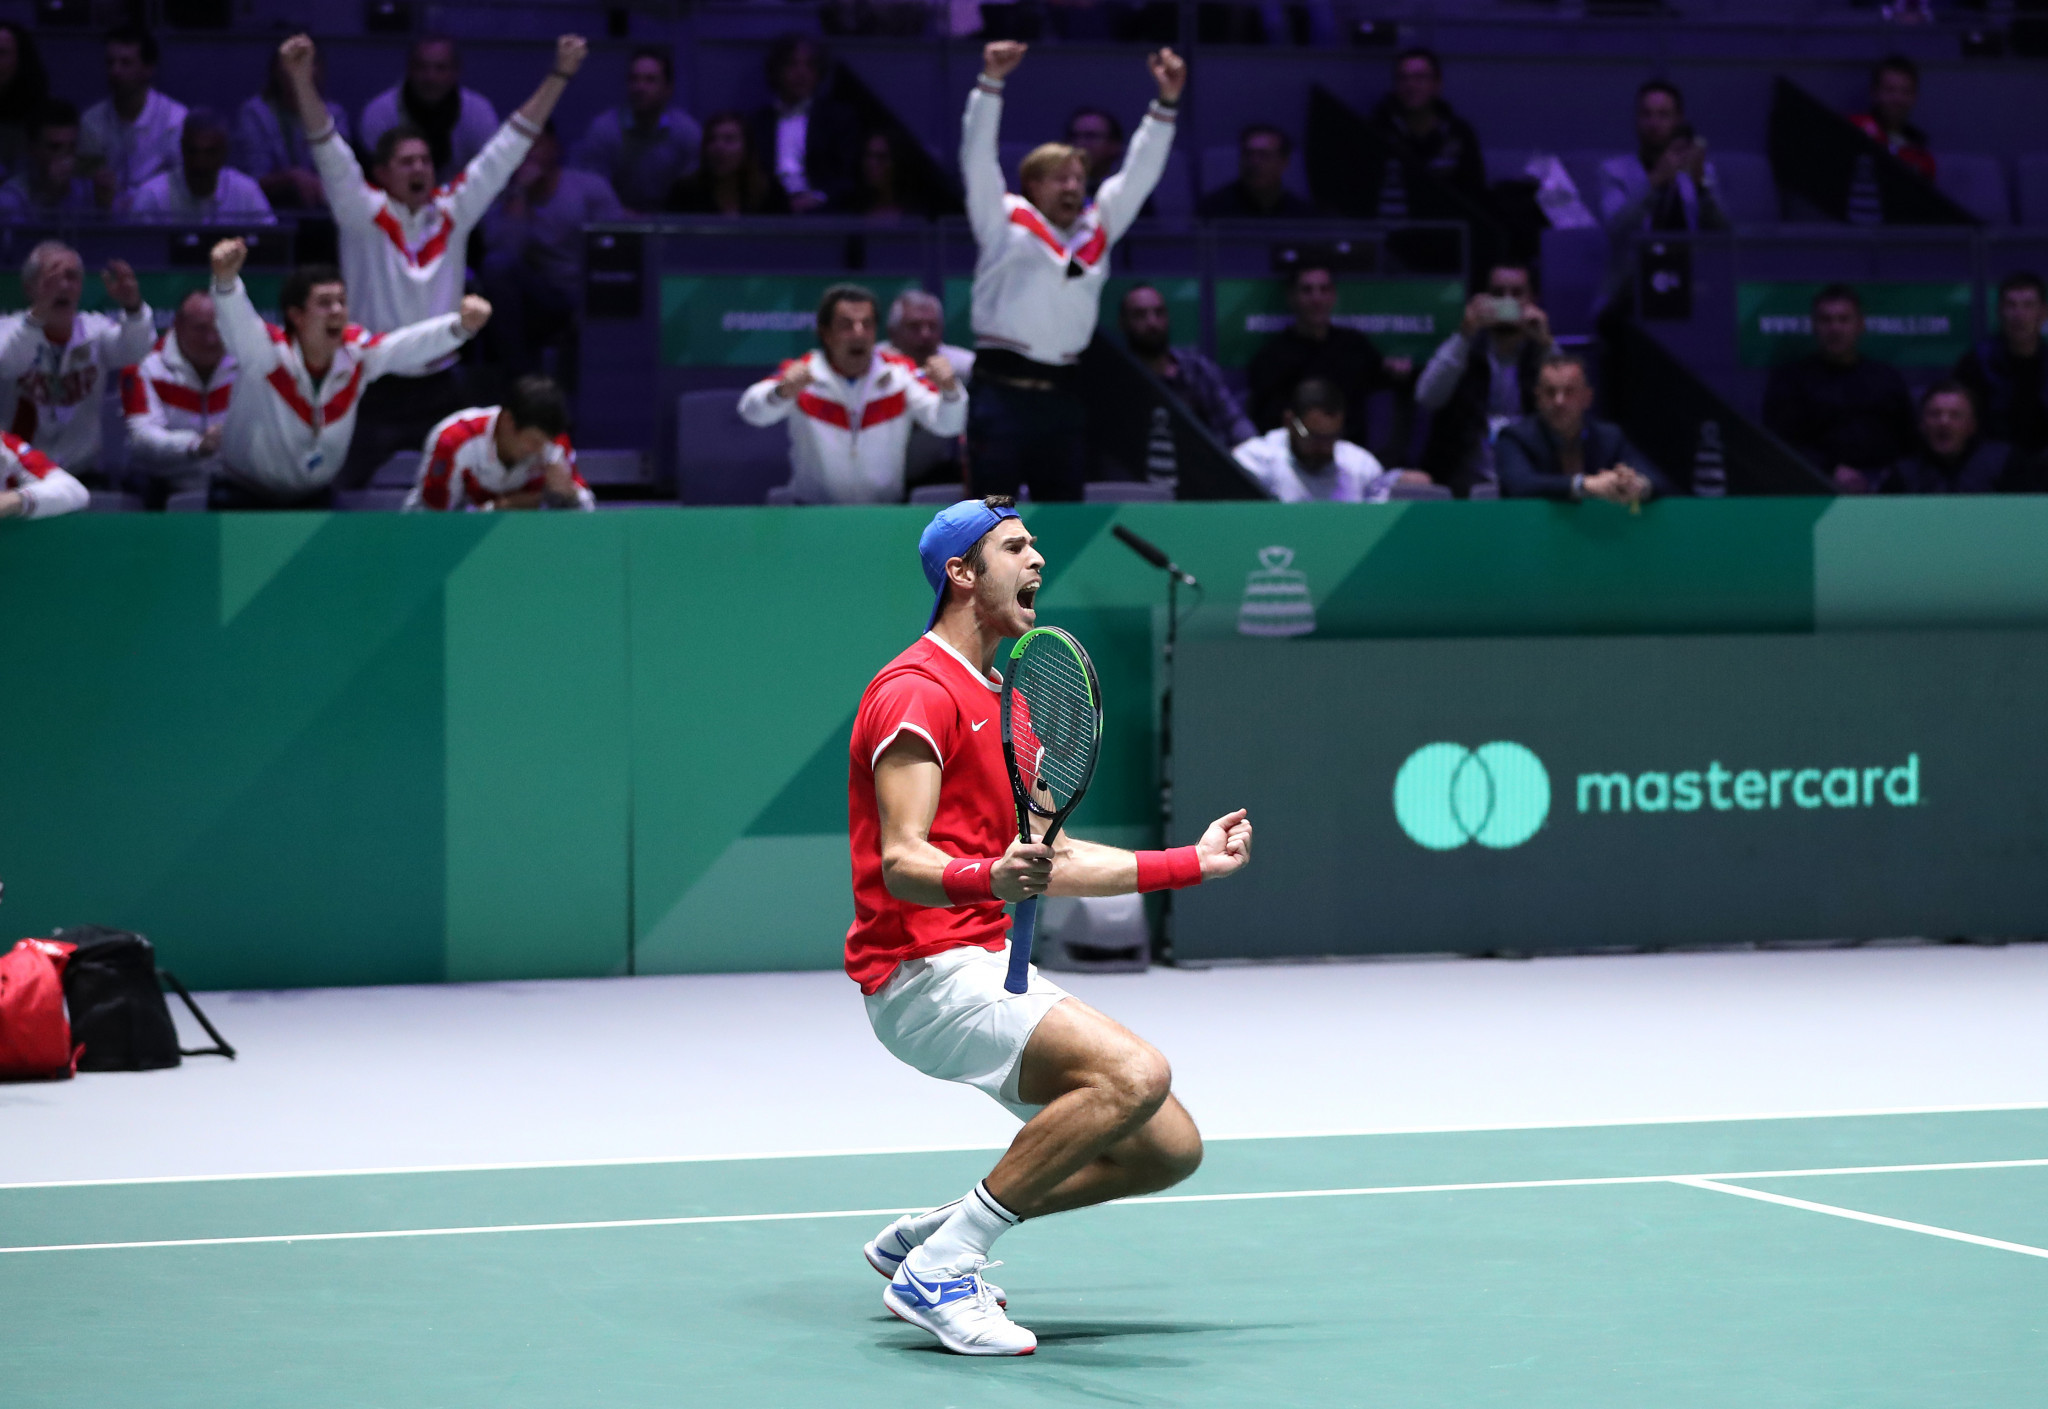 Russia clinch semi-final place after dramatic Davis Cup win over Serbia